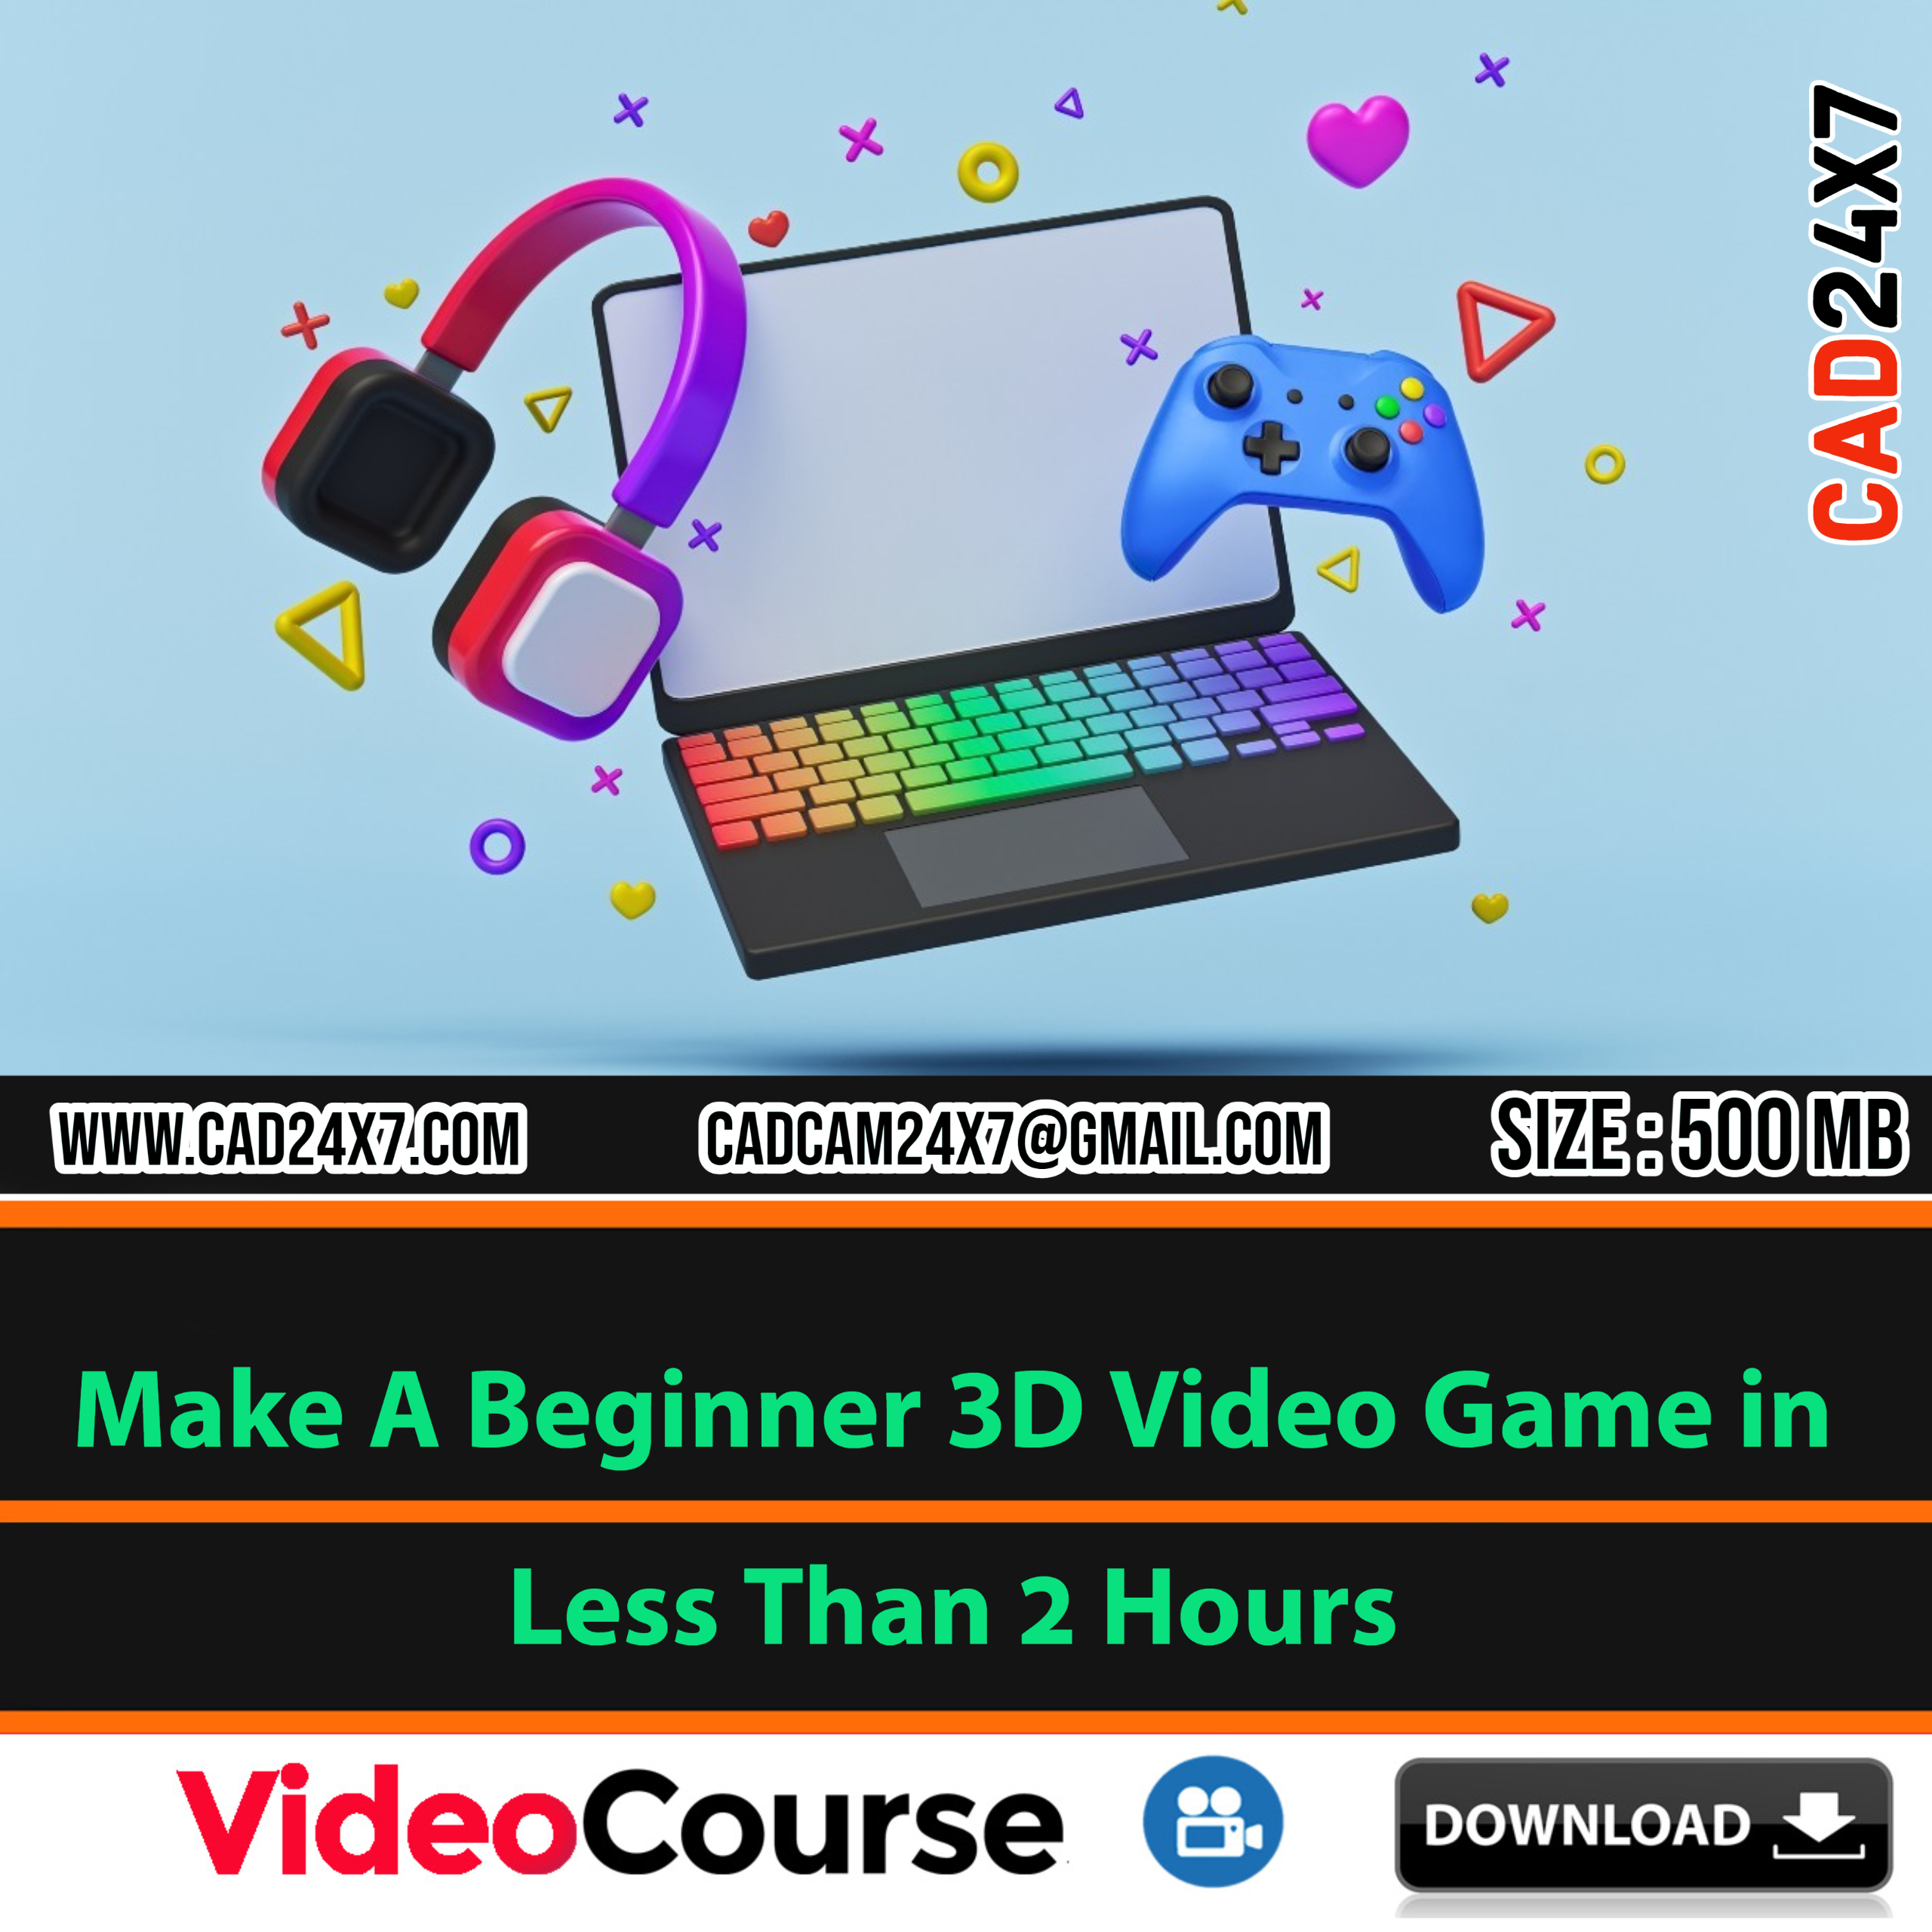 Make A Beginner 3D Video Game in Less Than 2 Hours